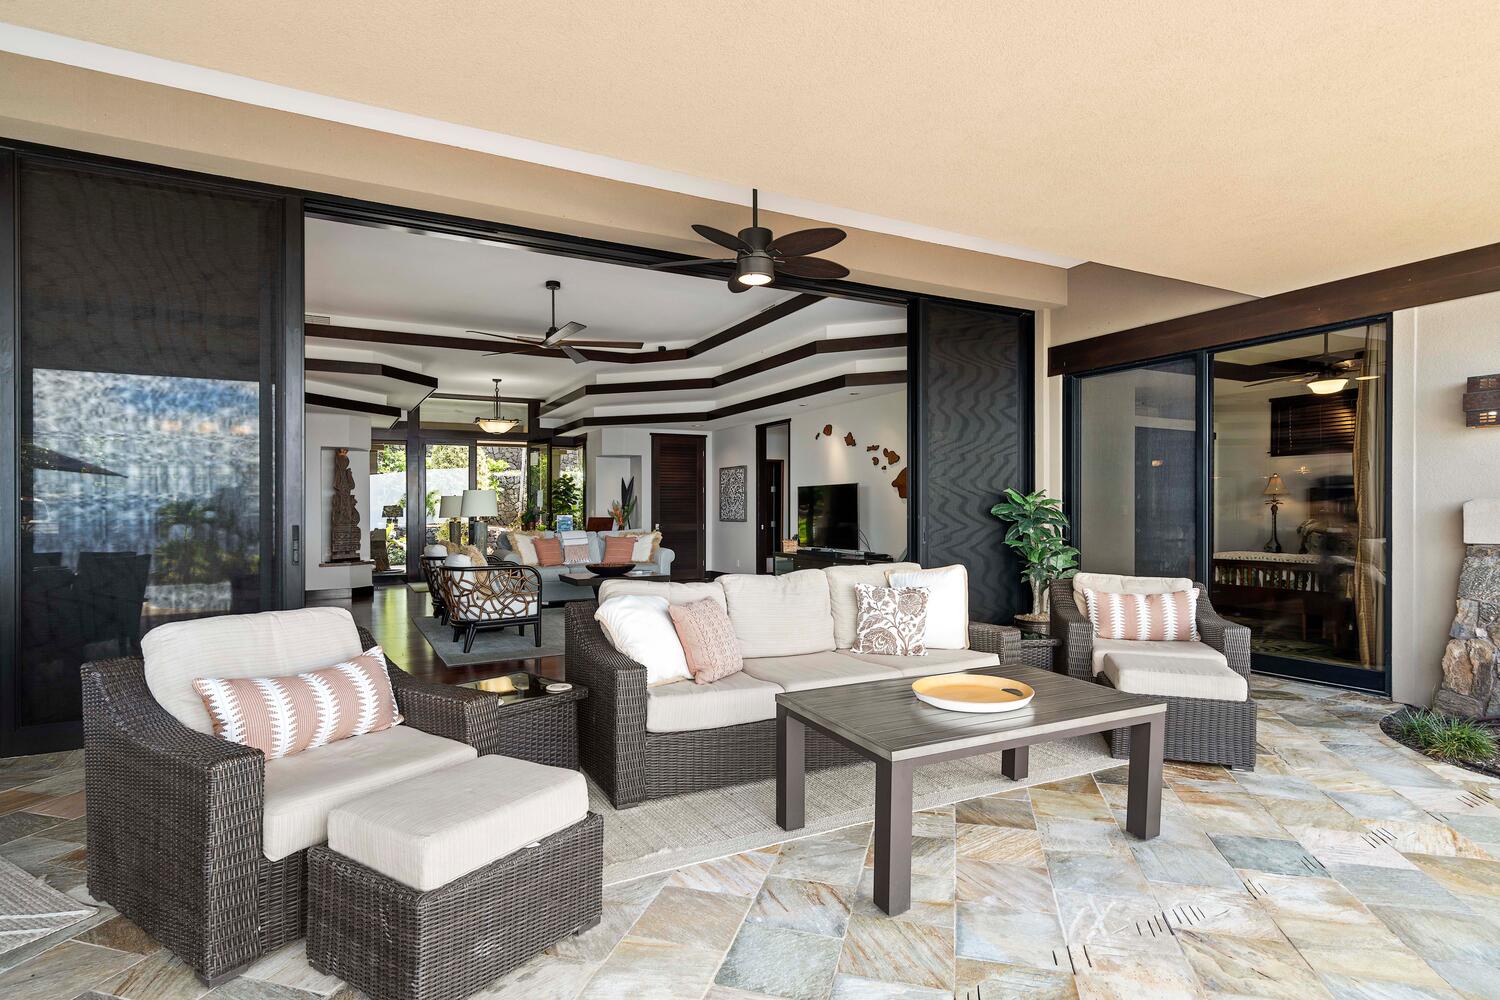 Kailua Kona Vacation Rentals, Island Oasis - Large sliding doors embrace Hawaii style living by connecting the outdoors to the inside